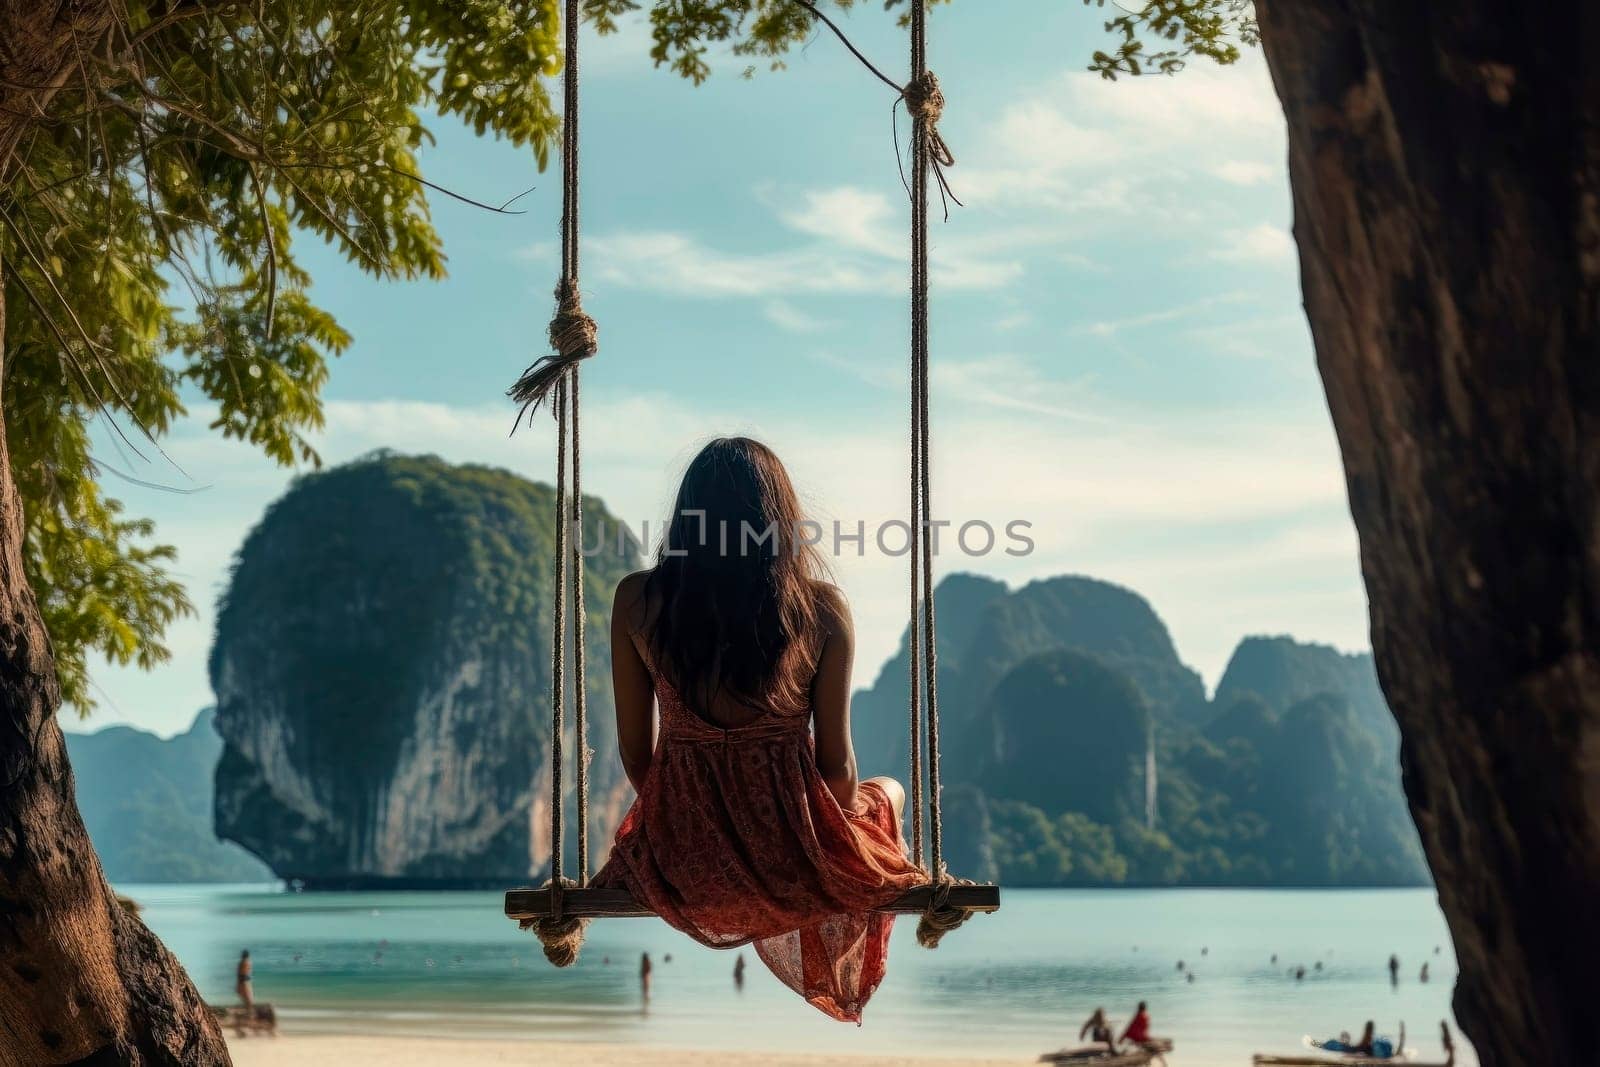 A traveler woman finds tranquility and relaxation as she swings above the crystal-clear waters of the Andaman Sea.